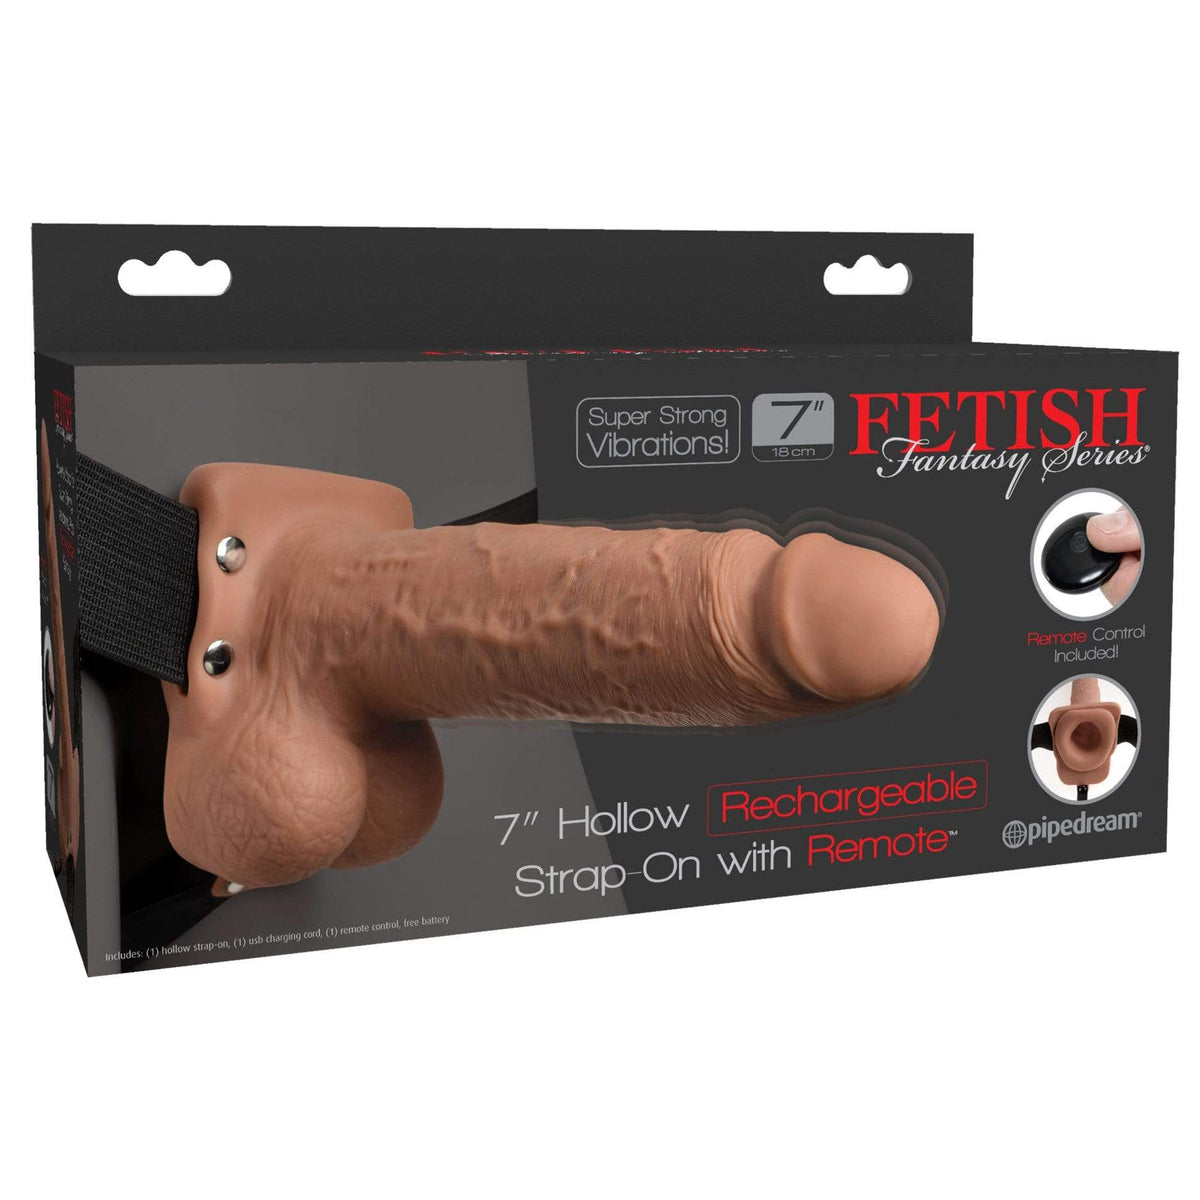 Pipedream - Fetish Fantasy Series Hollow Strap On with Remote 7&quot; (Brown) -  Strap On with Hollow Dildo for Male (Vibration) Rechargeable  Durio.sg